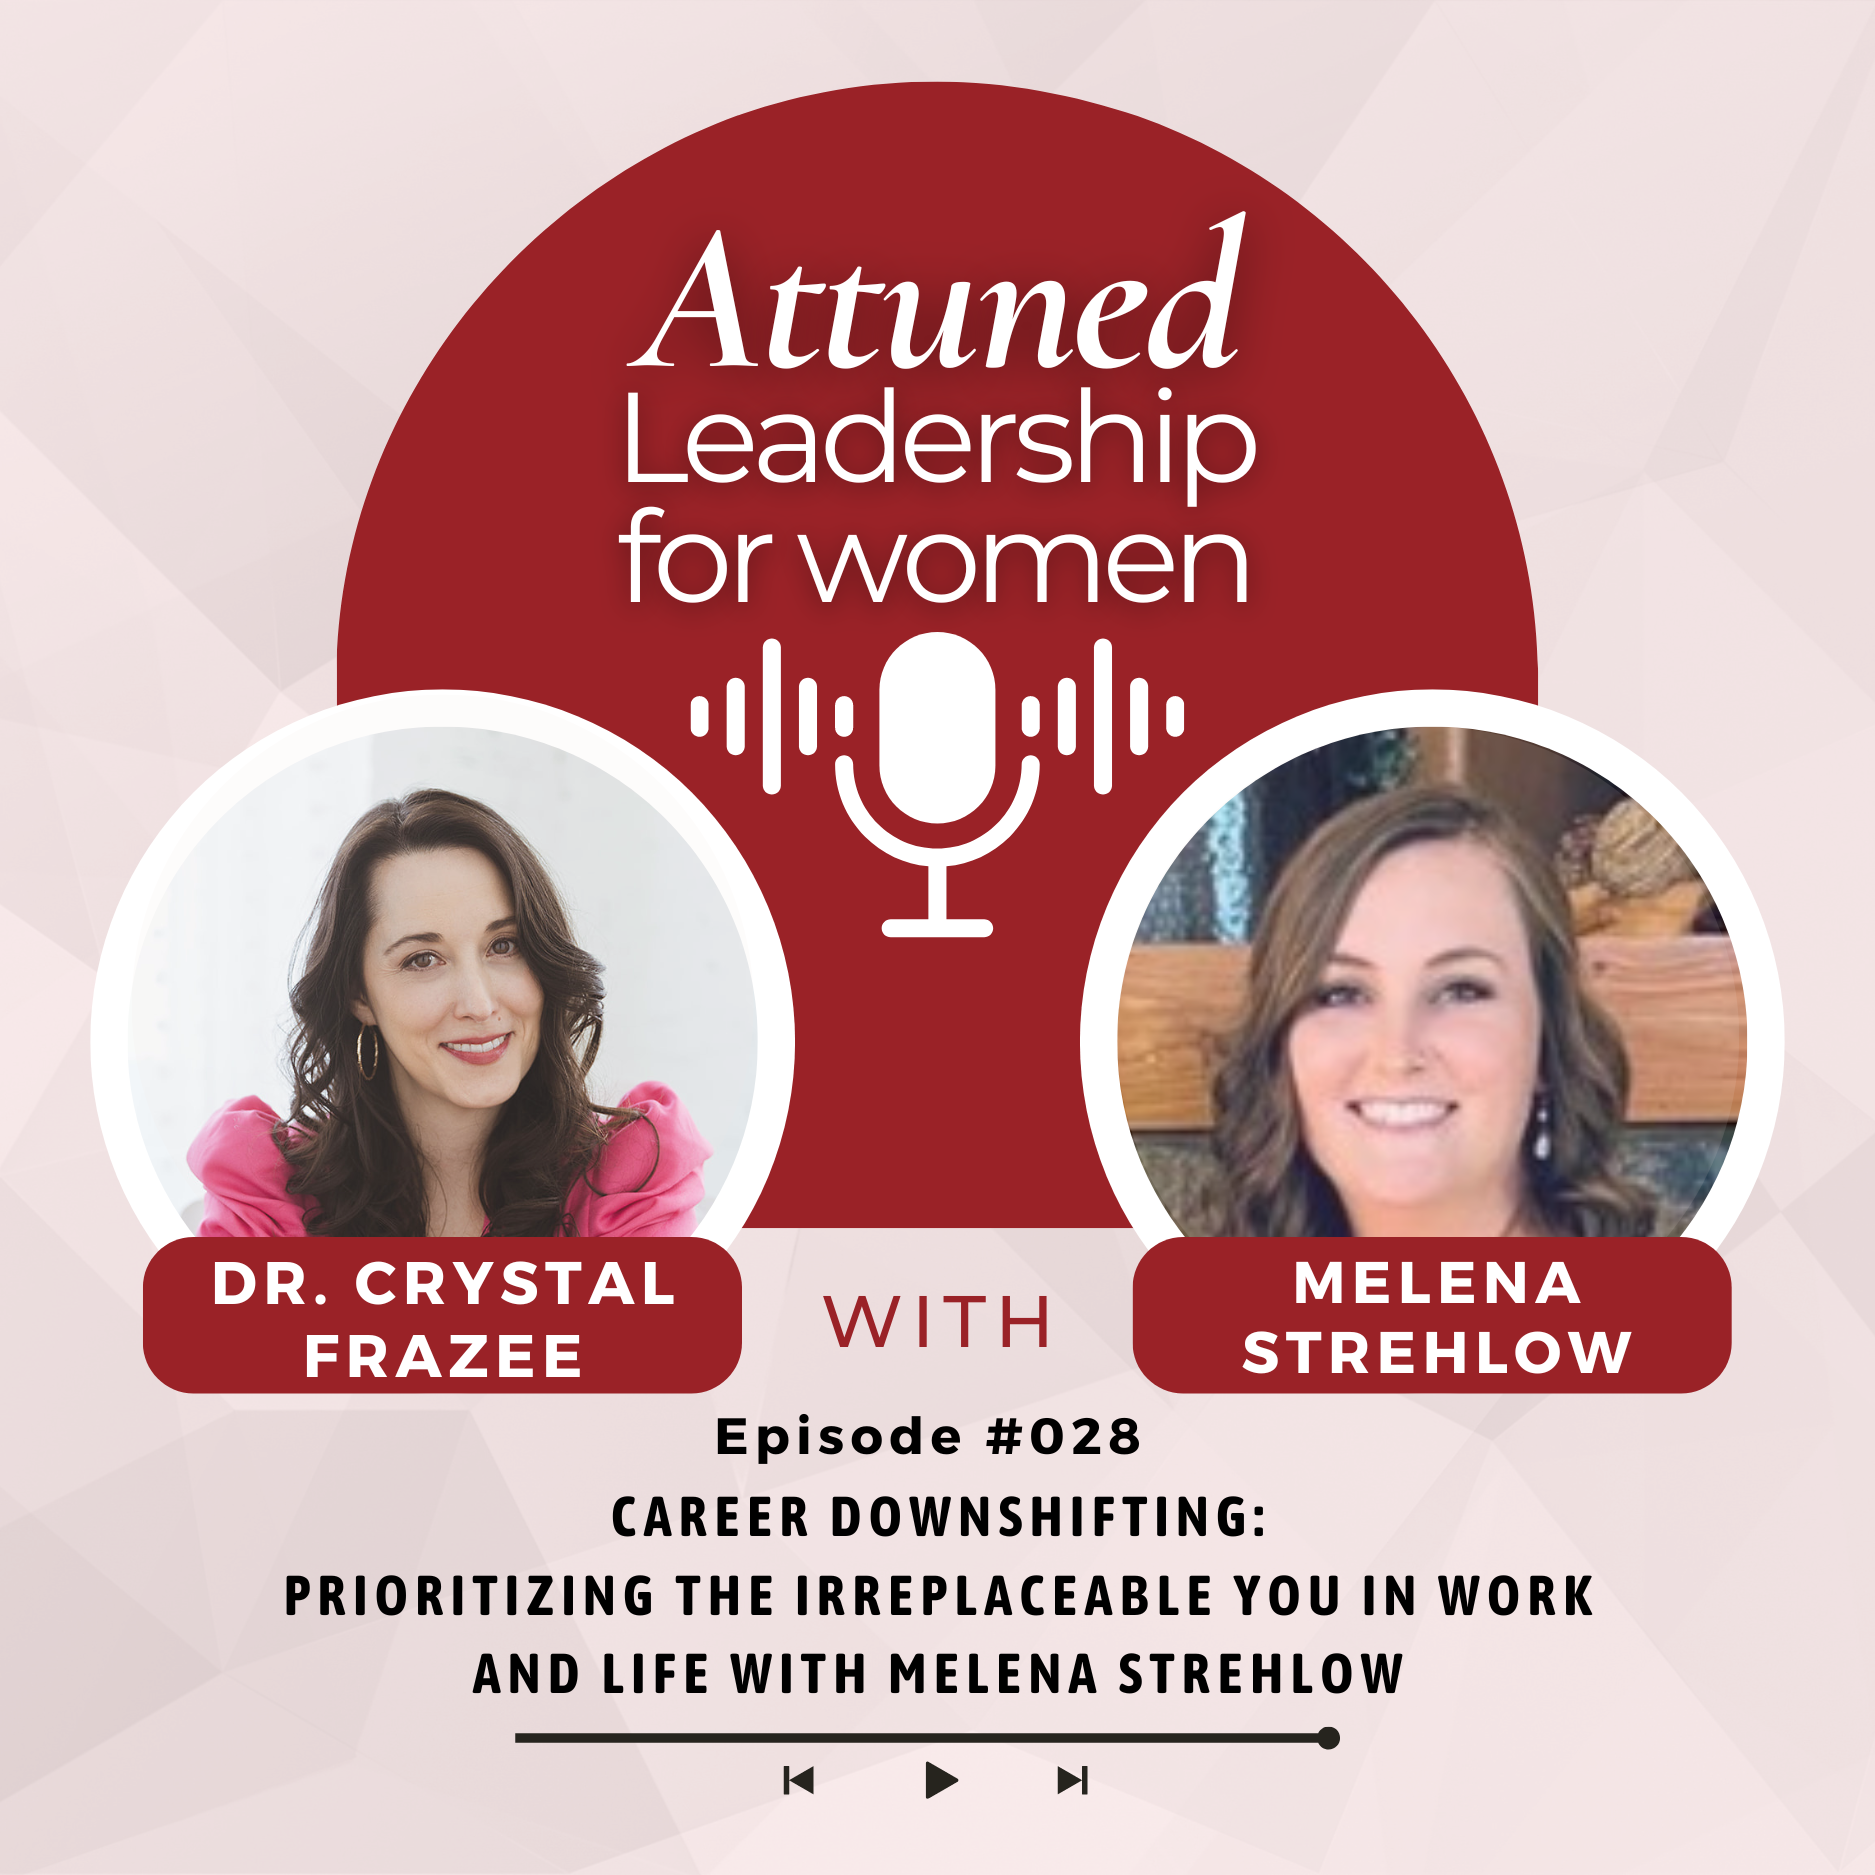 Two white women on the cover of a podcast episode image discussing the topic of cringe-free self-promotion for women leaders.